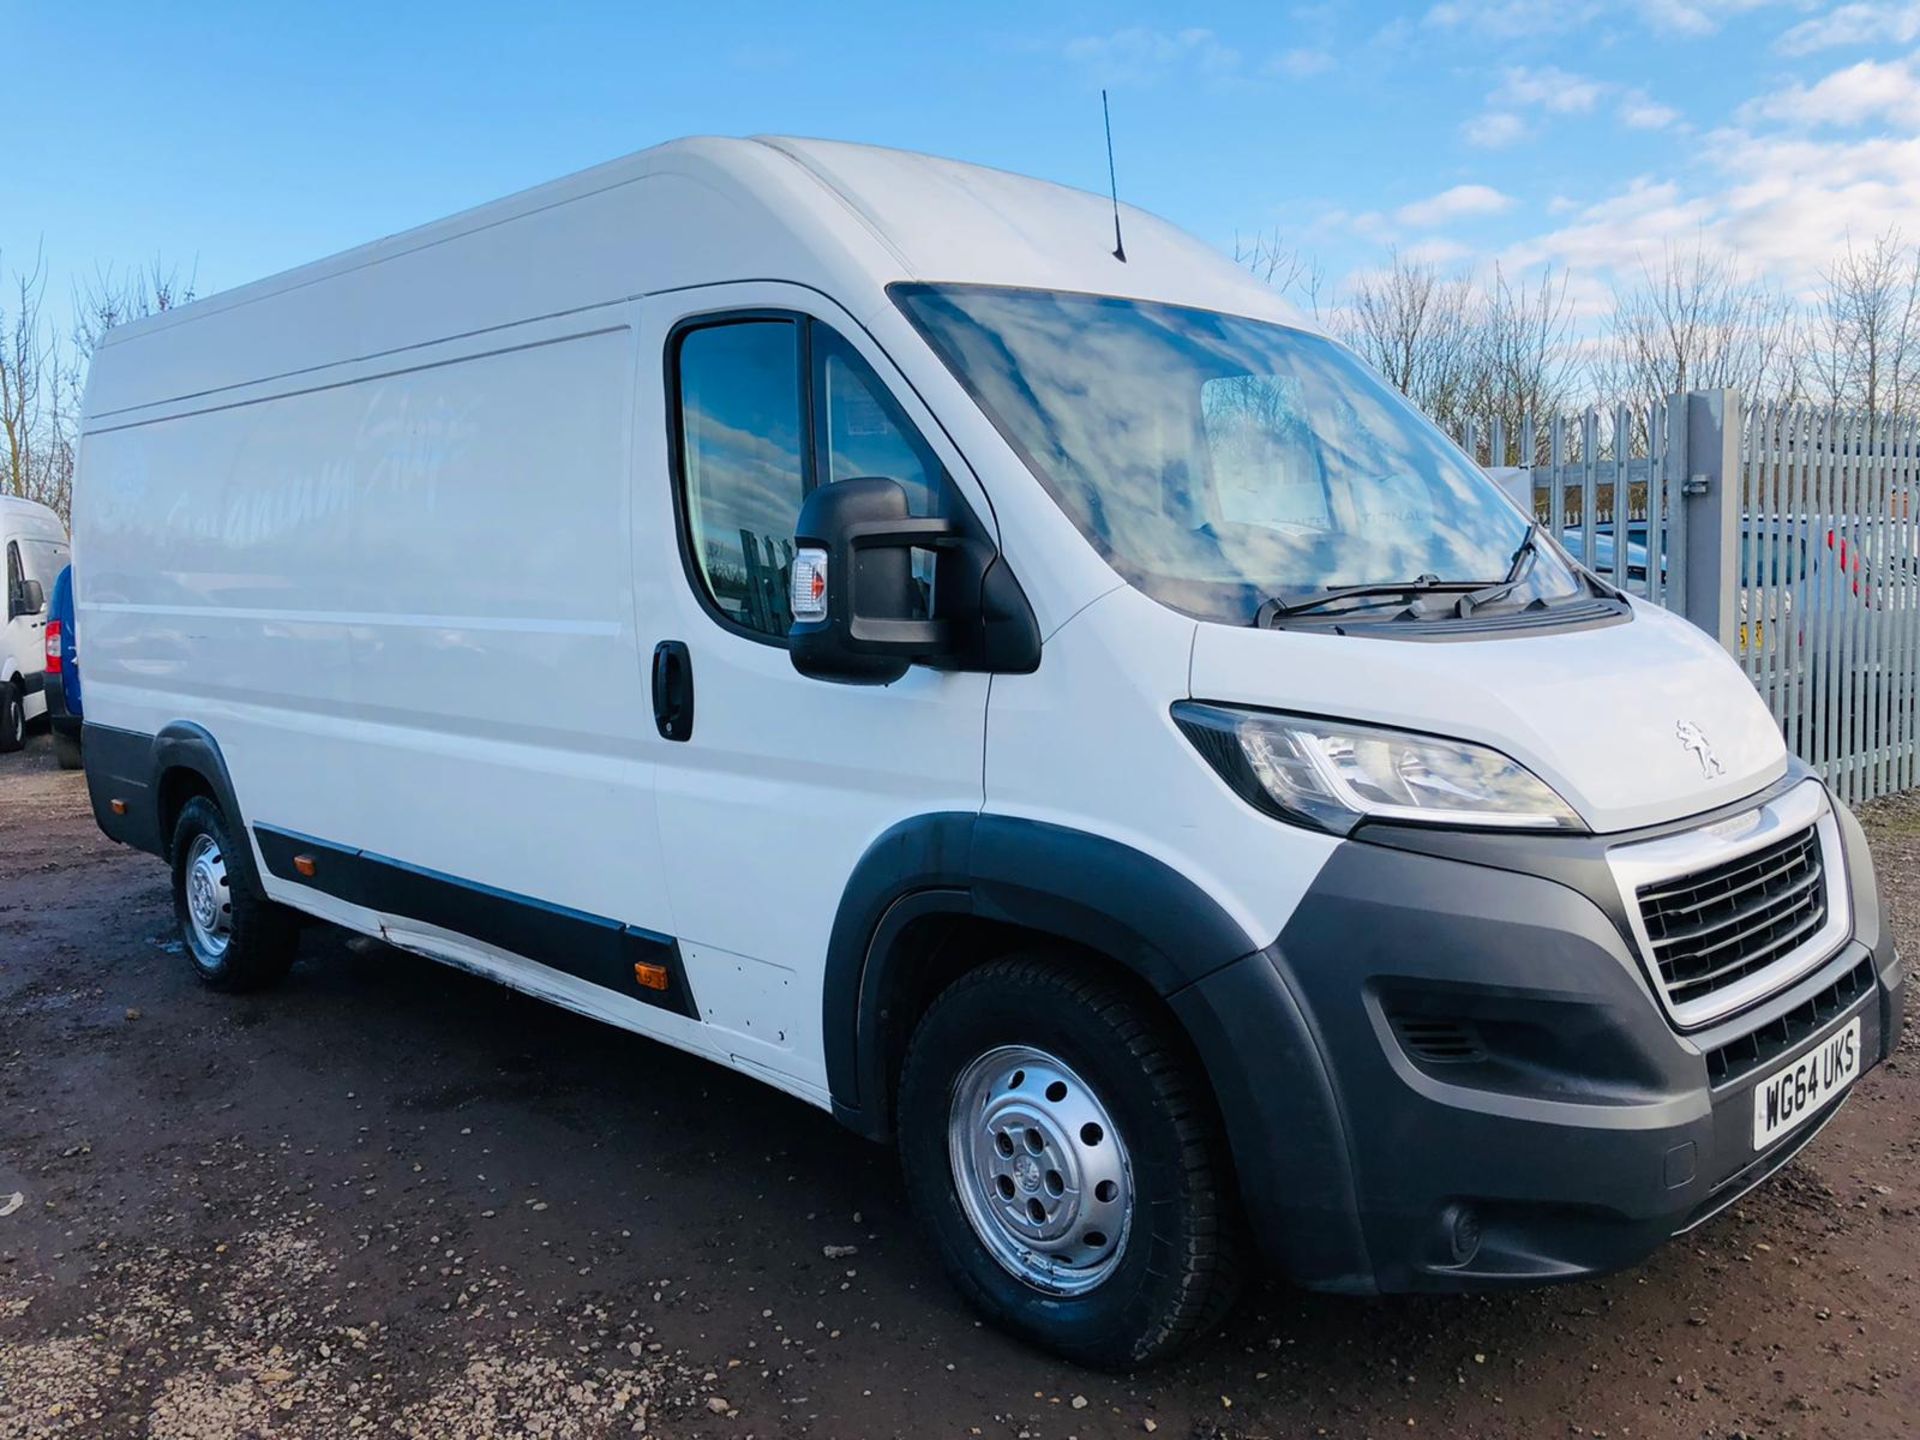 Peugeot Boxer 2.2 HDI 435 Professional L4 H2 2014 '64 Reg' Sat Nav - Air Con - Only Done 76K - Image 3 of 24